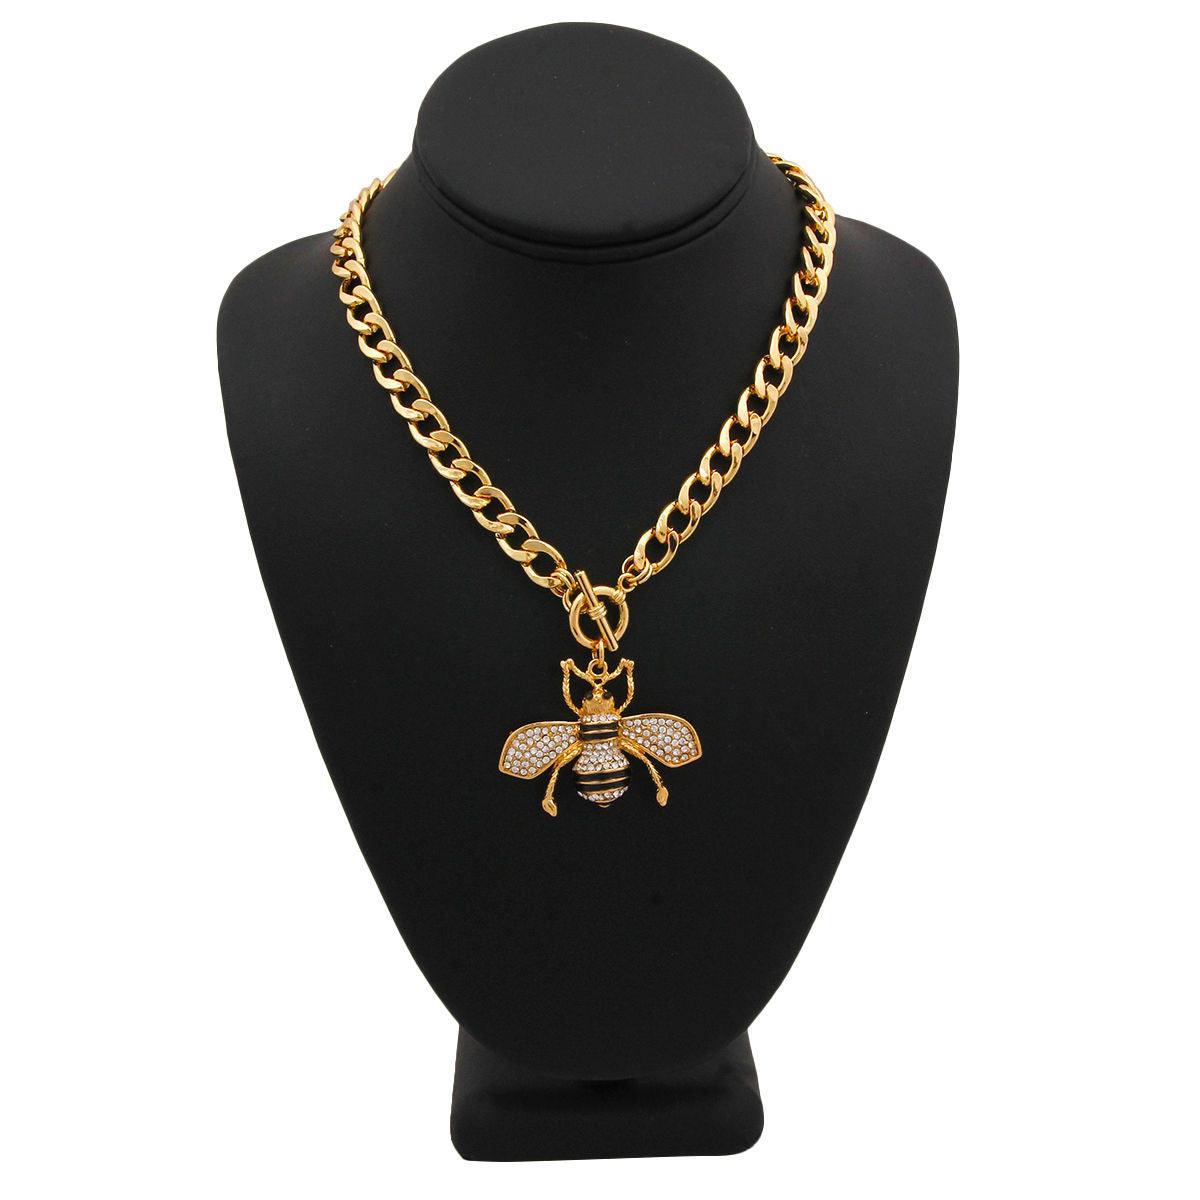 Chic Bee Chain Necklace Gold Plated